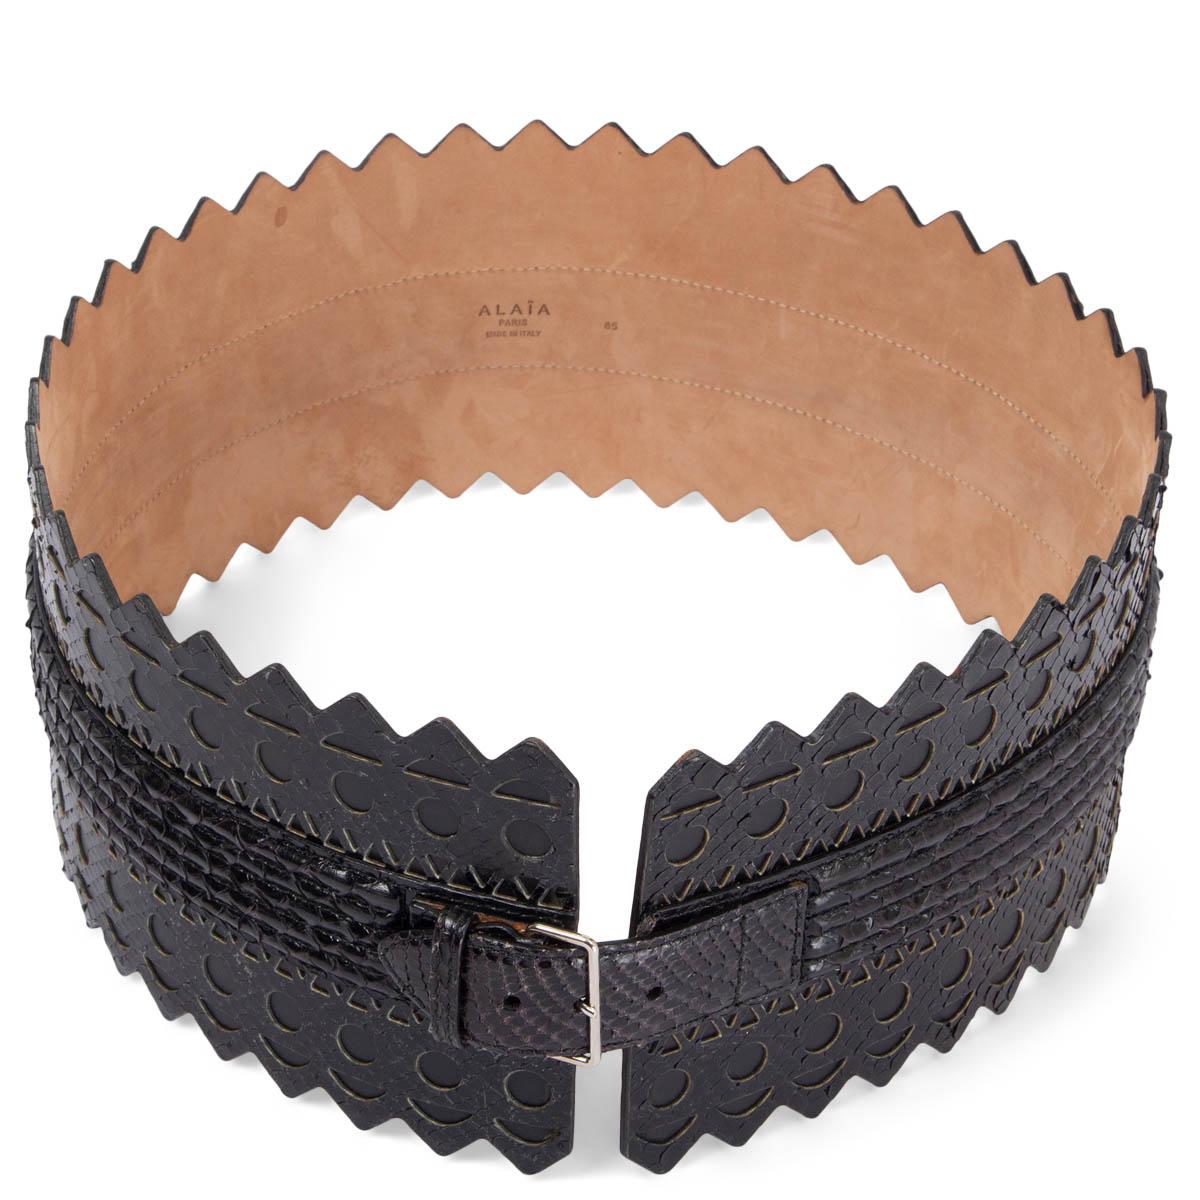 100% authentic Alaïa perforated laser-cut waist belt in black python and leather with one buckle closure in the middle. Has been worn and is in excellent condition. 

Measurements
Tag Size	85
Width	12cm (4.7in)
Fits	83cm (32.4in) to 87cm